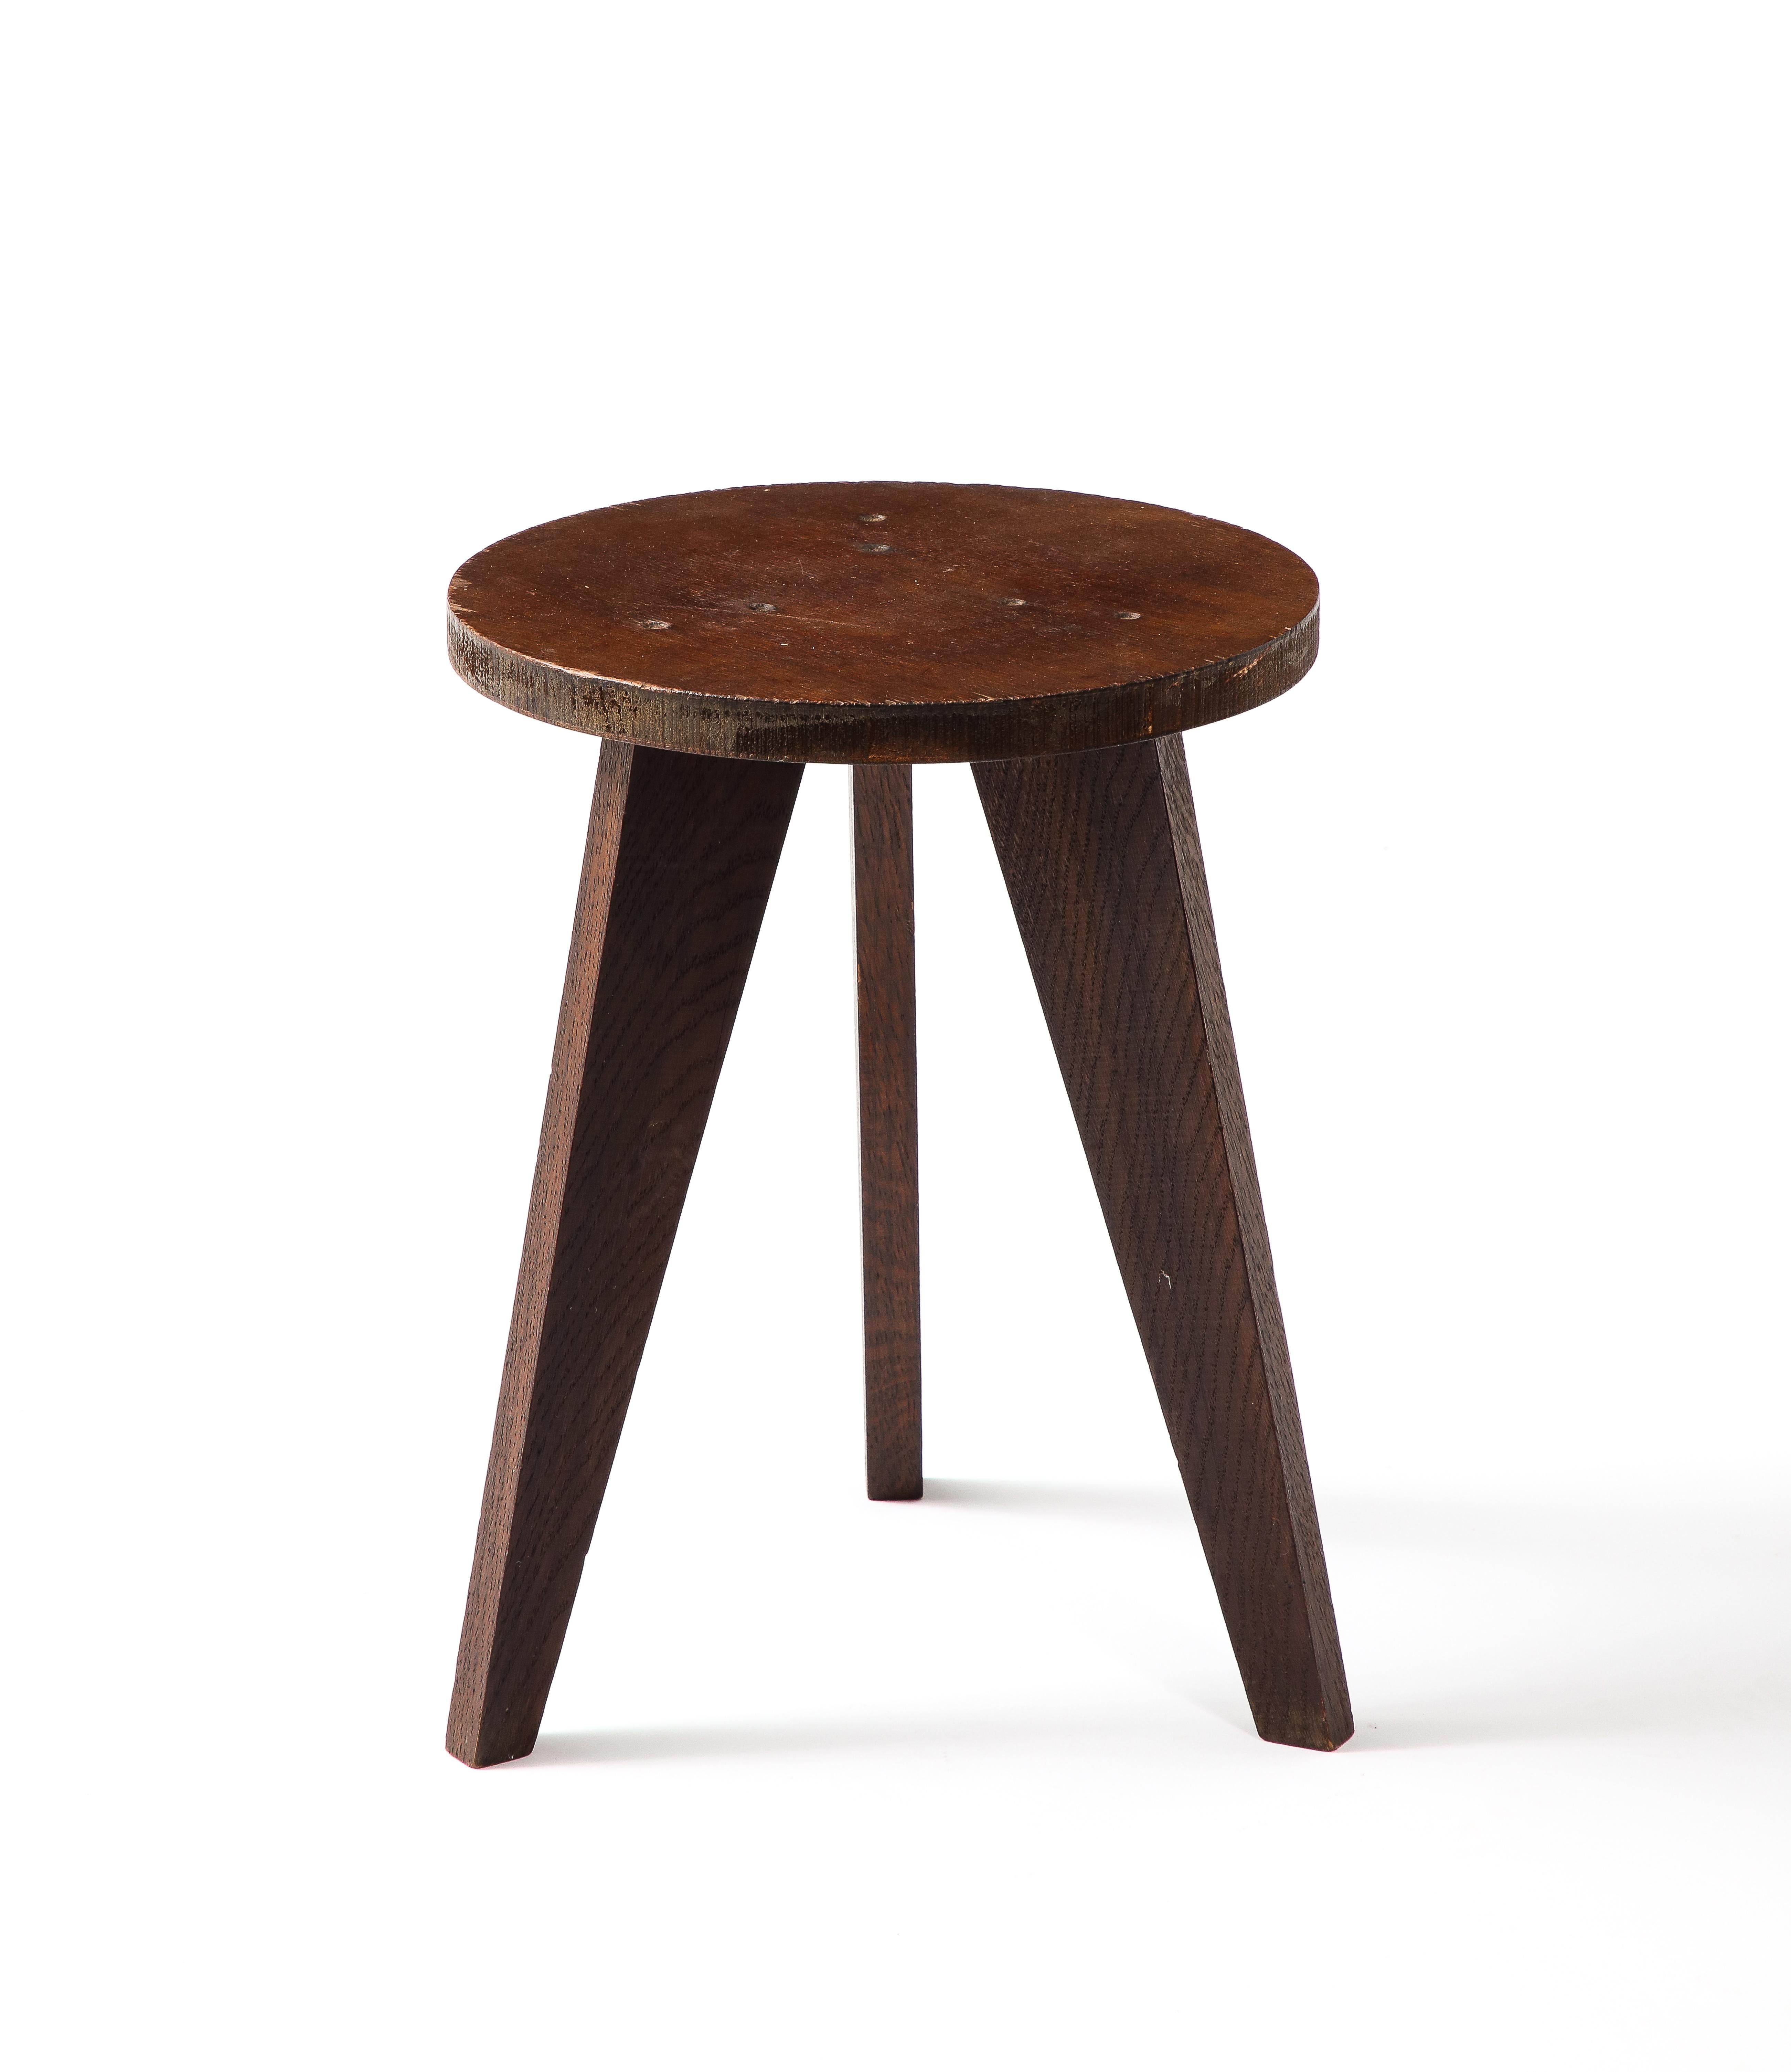 Dark Oak Stool in the Style of Hervé Bayley, France 1950s For Sale 4